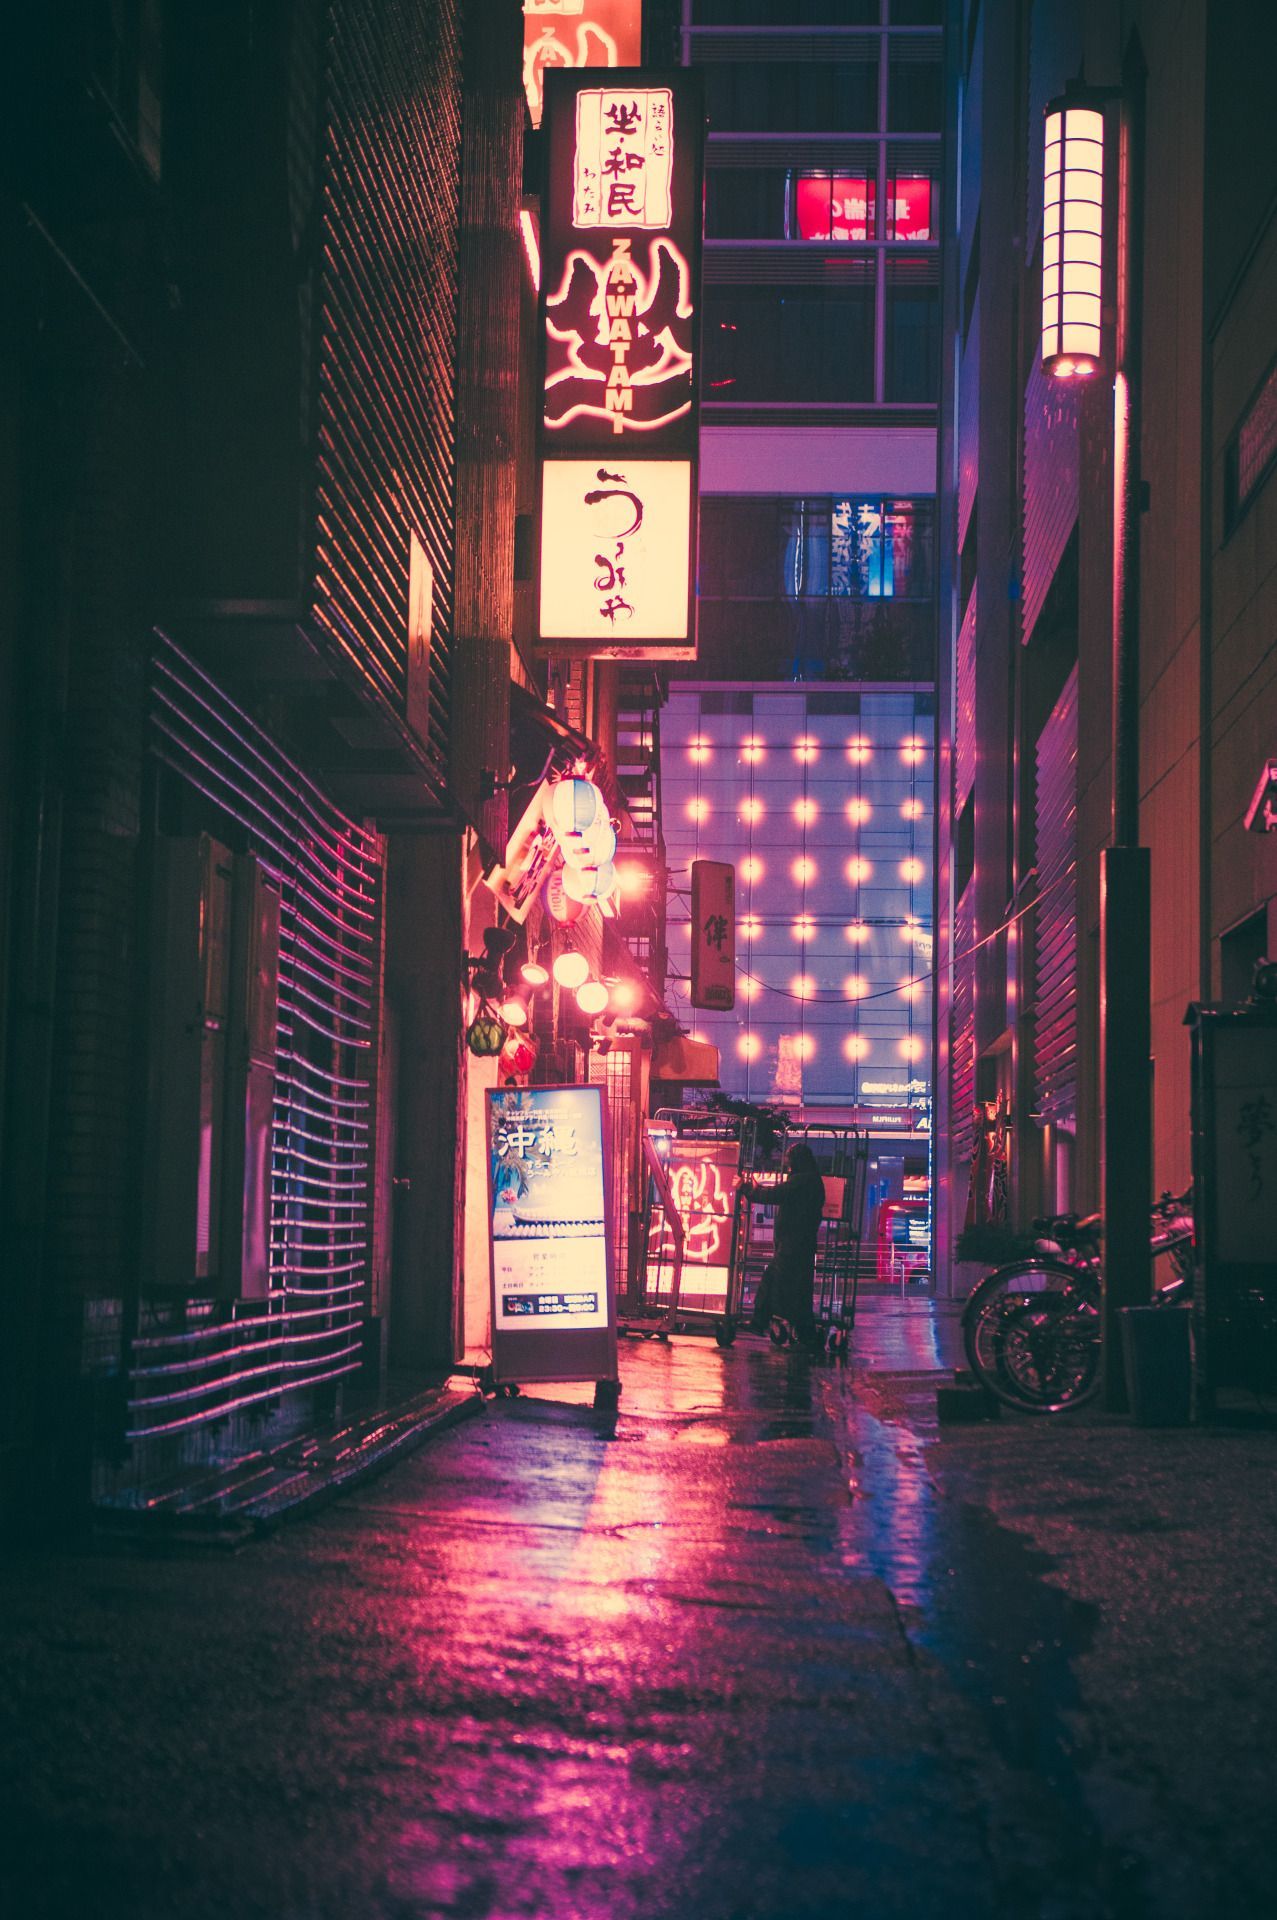 15 Top wallpaper aesthetic japan You Can Use It free - Aesthetic Arena